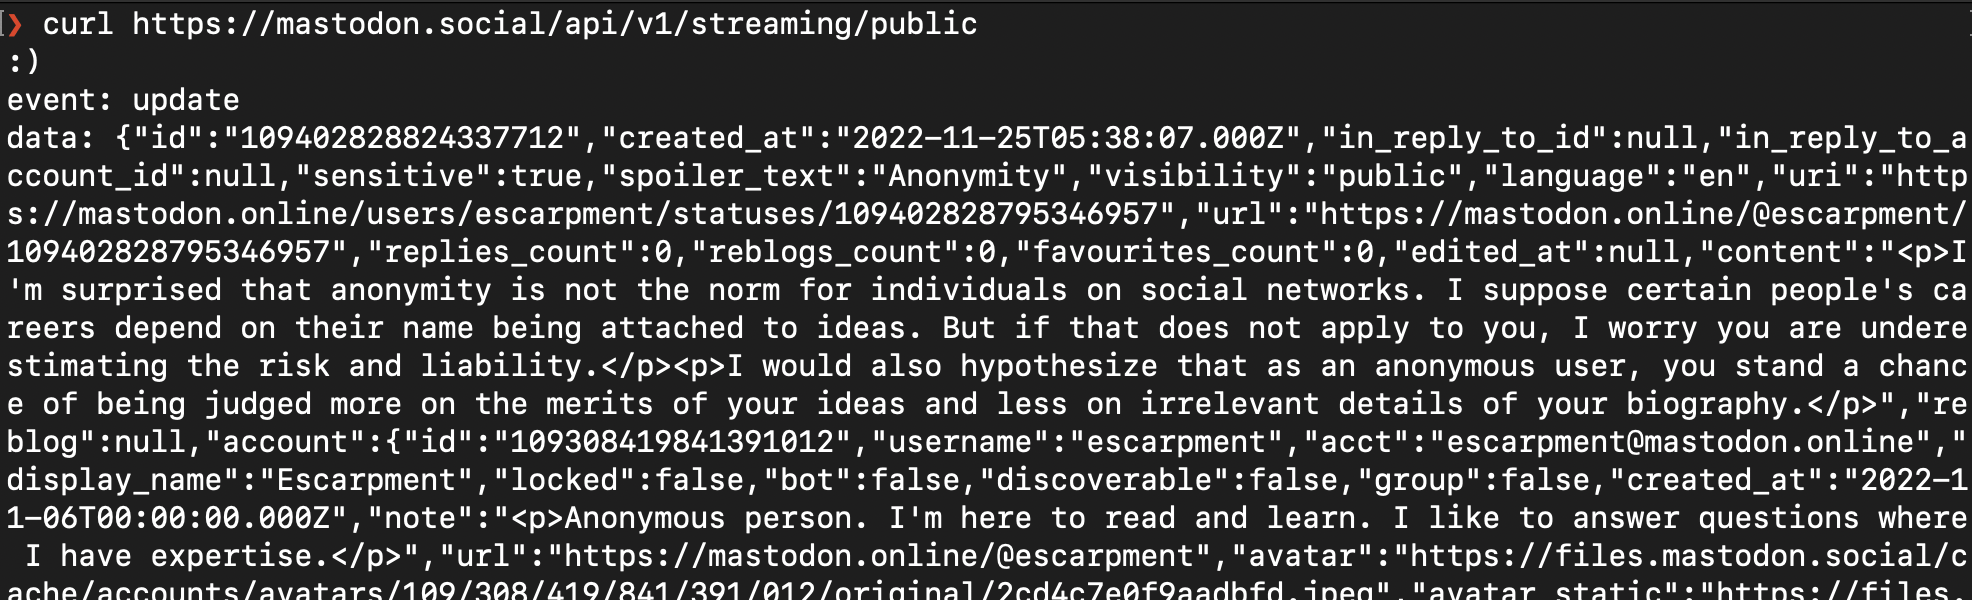 Running curl https://mastodon.social/api/v1/streaming/public in your terminal shows a response with event data